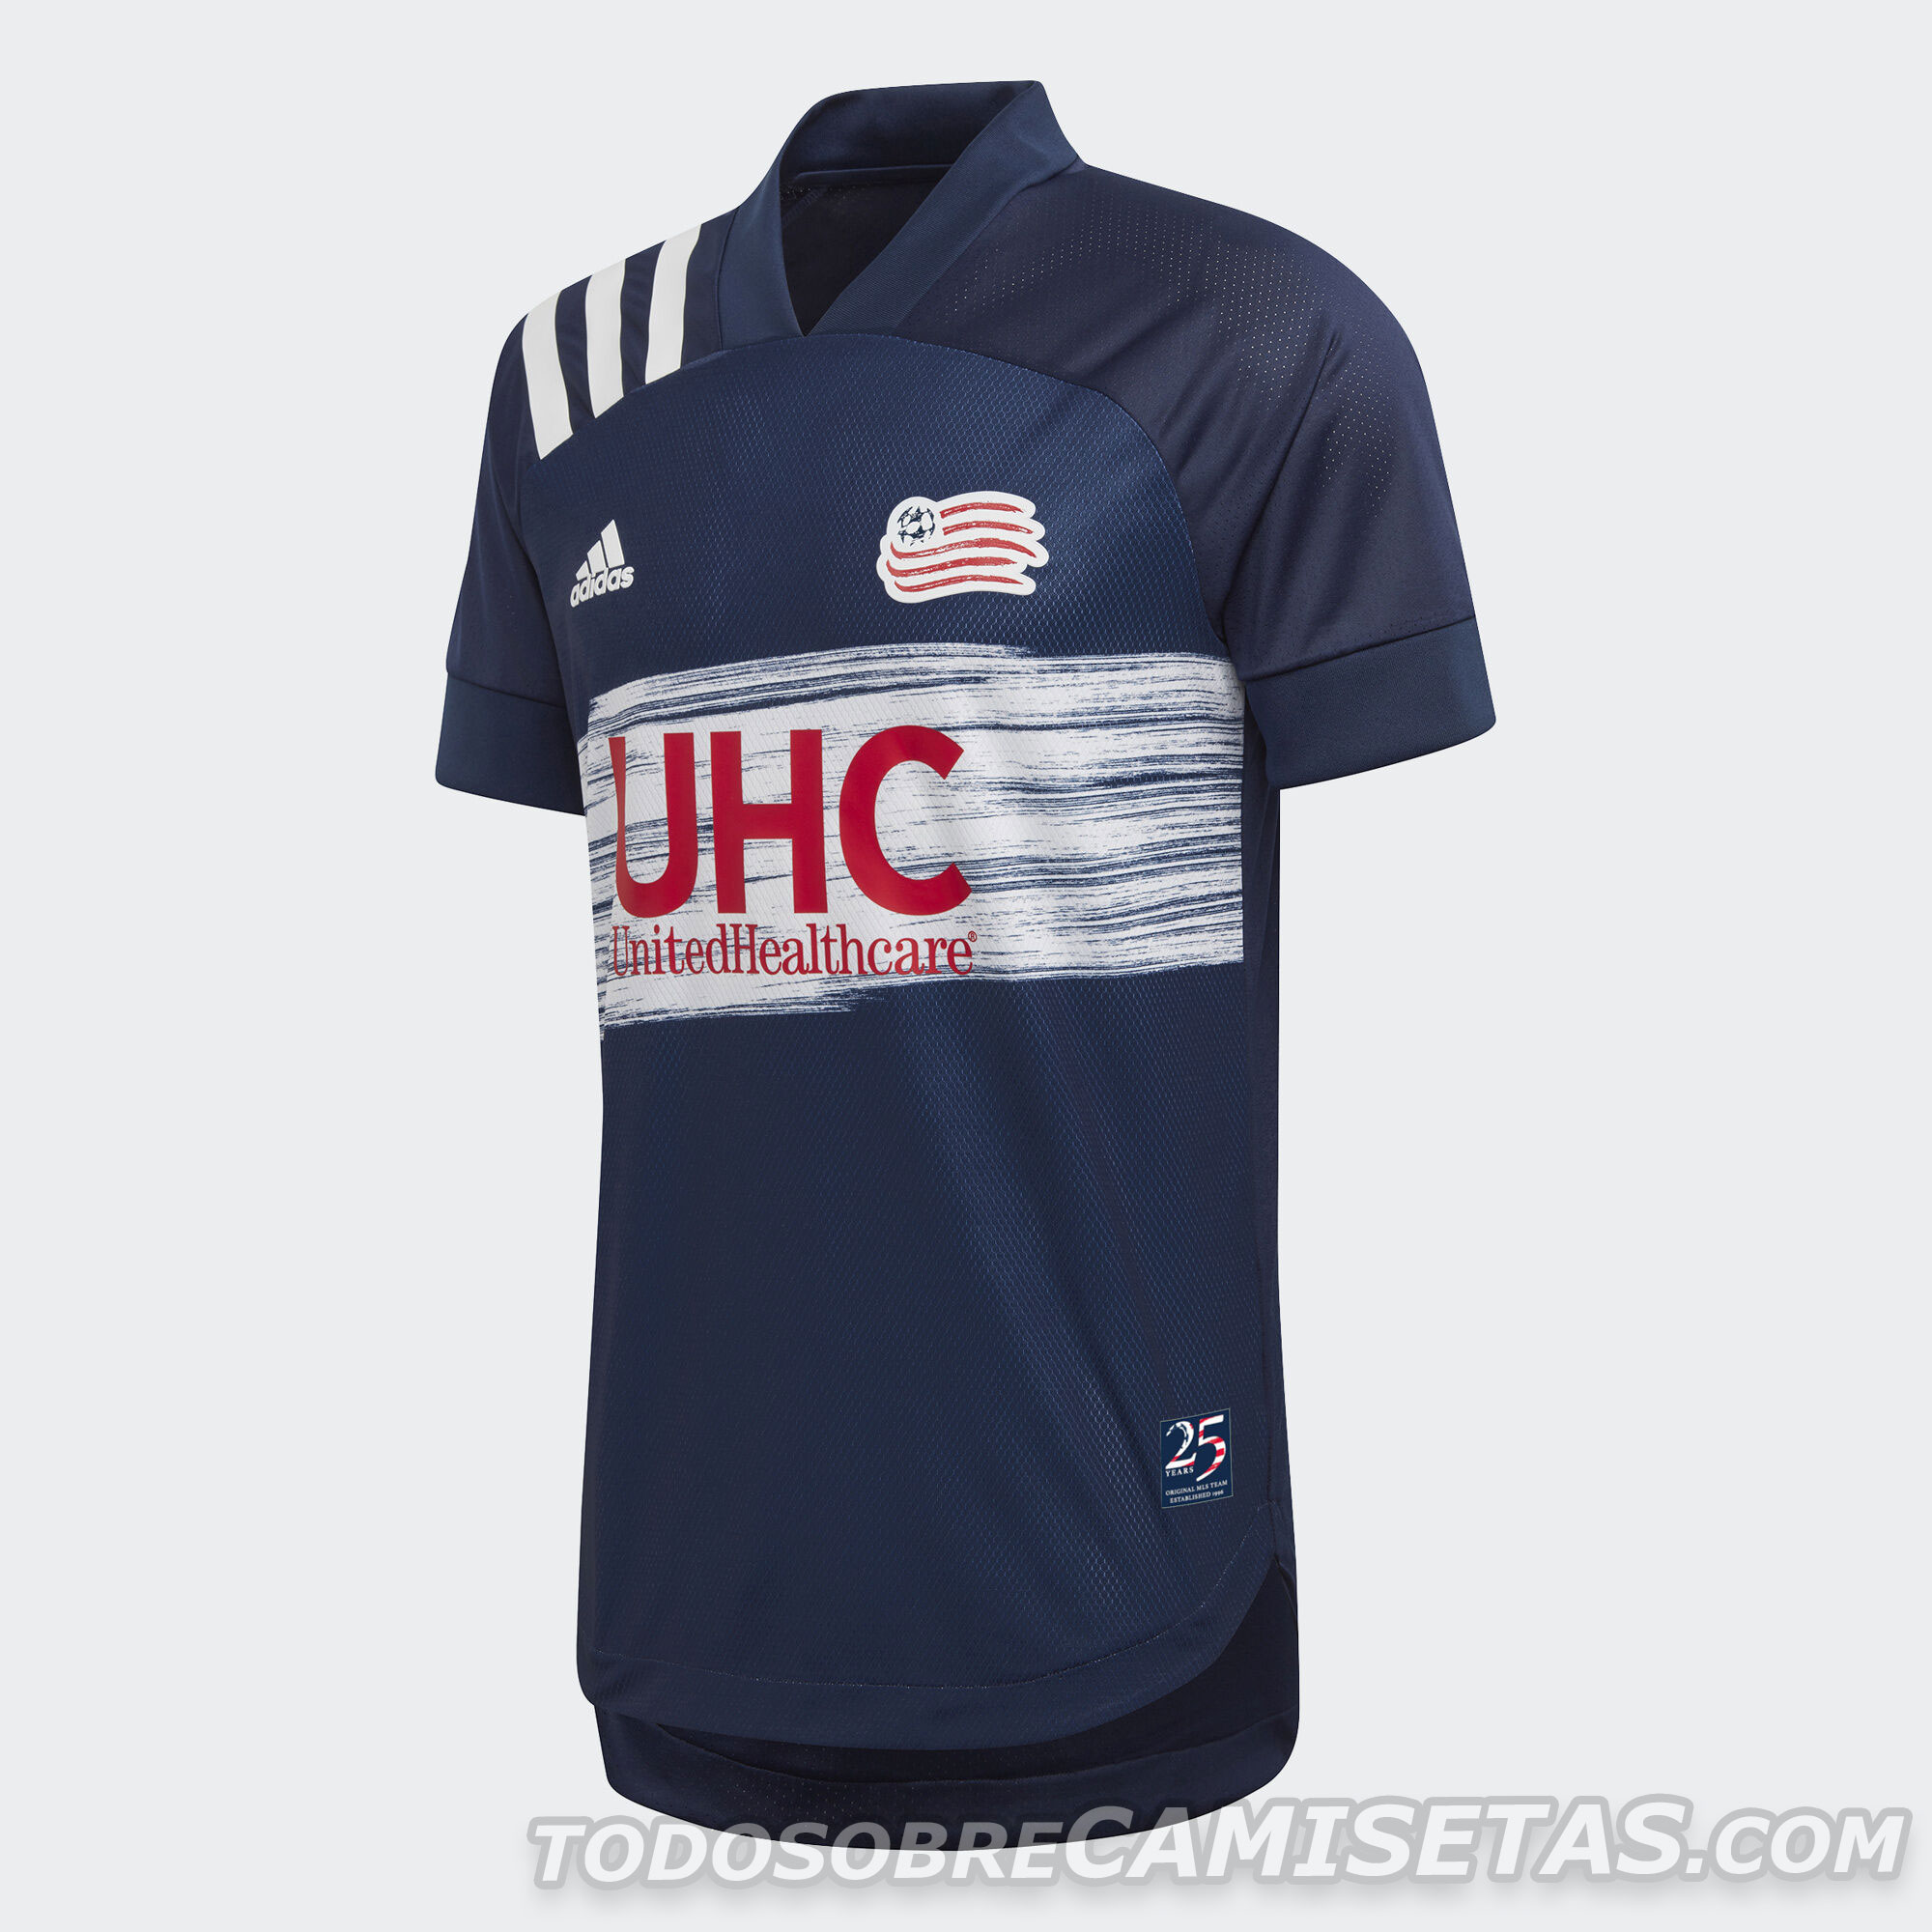 The Revolution's 2020 kit is a throwback to the inaugural MLS season